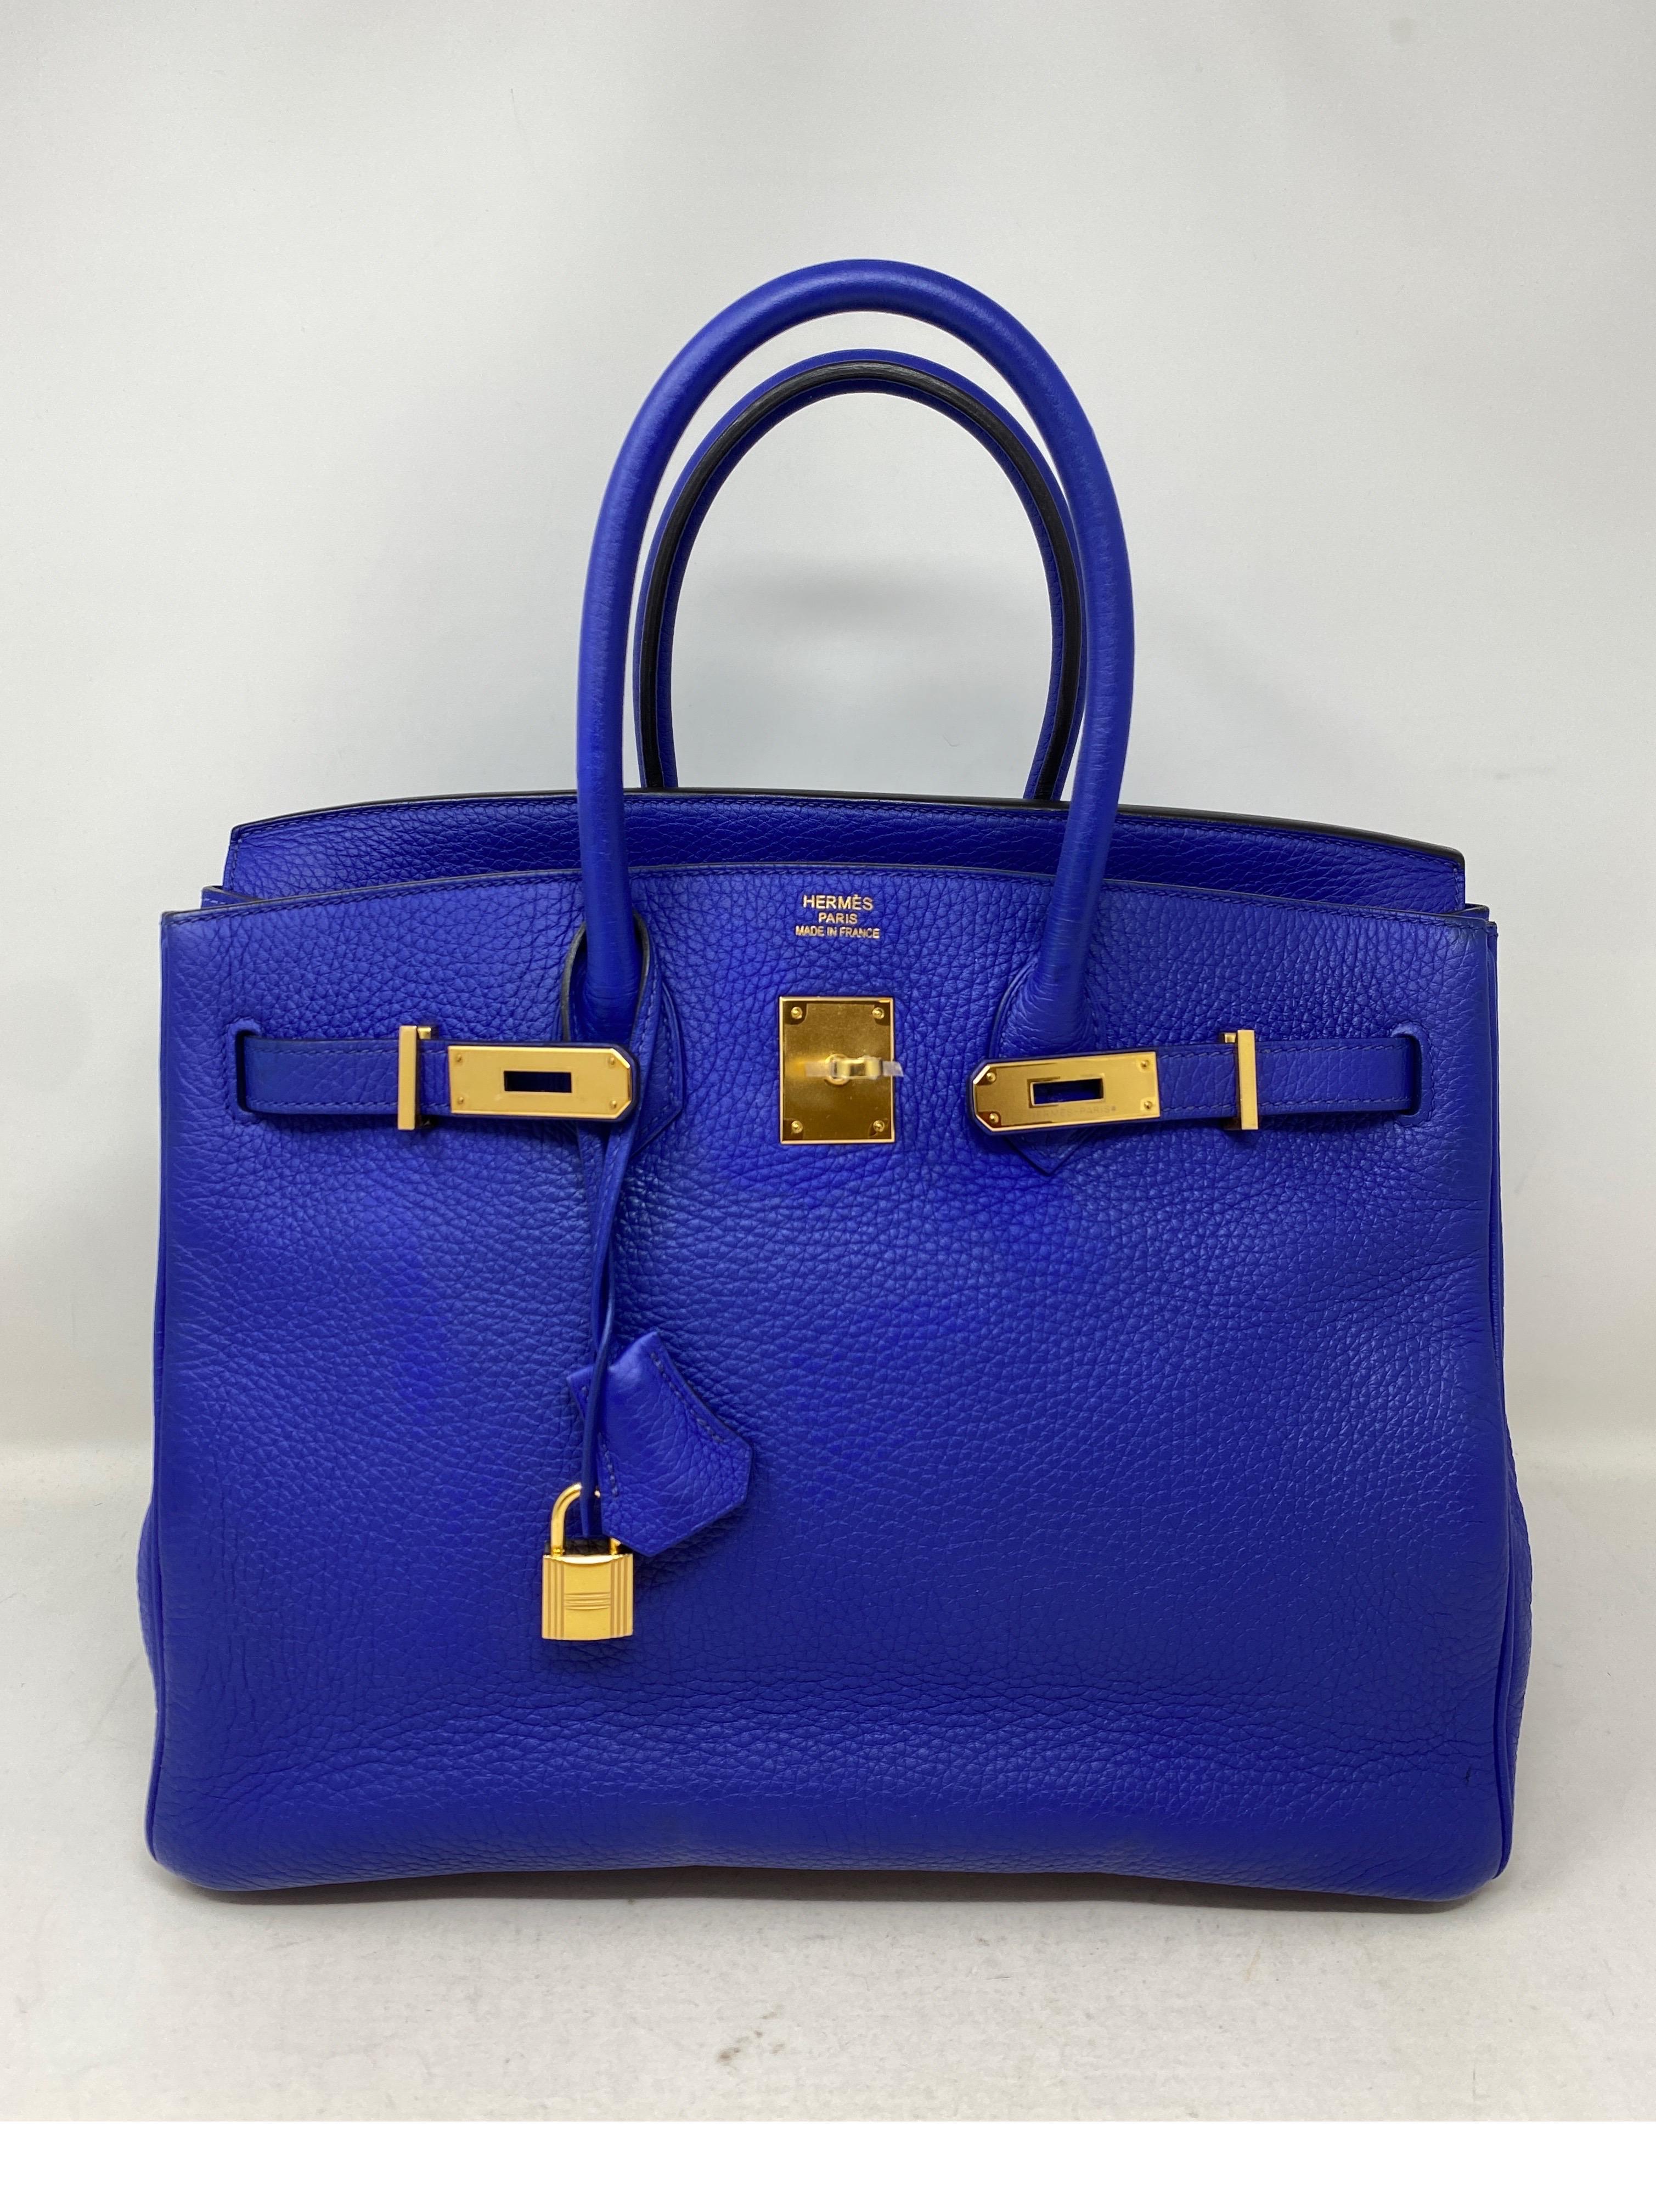 Hermes Bleu Electrique Birkin 35 Bag. Excellent condition. Vibrant electric blue color that stands out. Rare bag with gold hardware. Clemence leather. This one won't last. Sells quickly on the resale market. Great investment bag. Includes clochette,